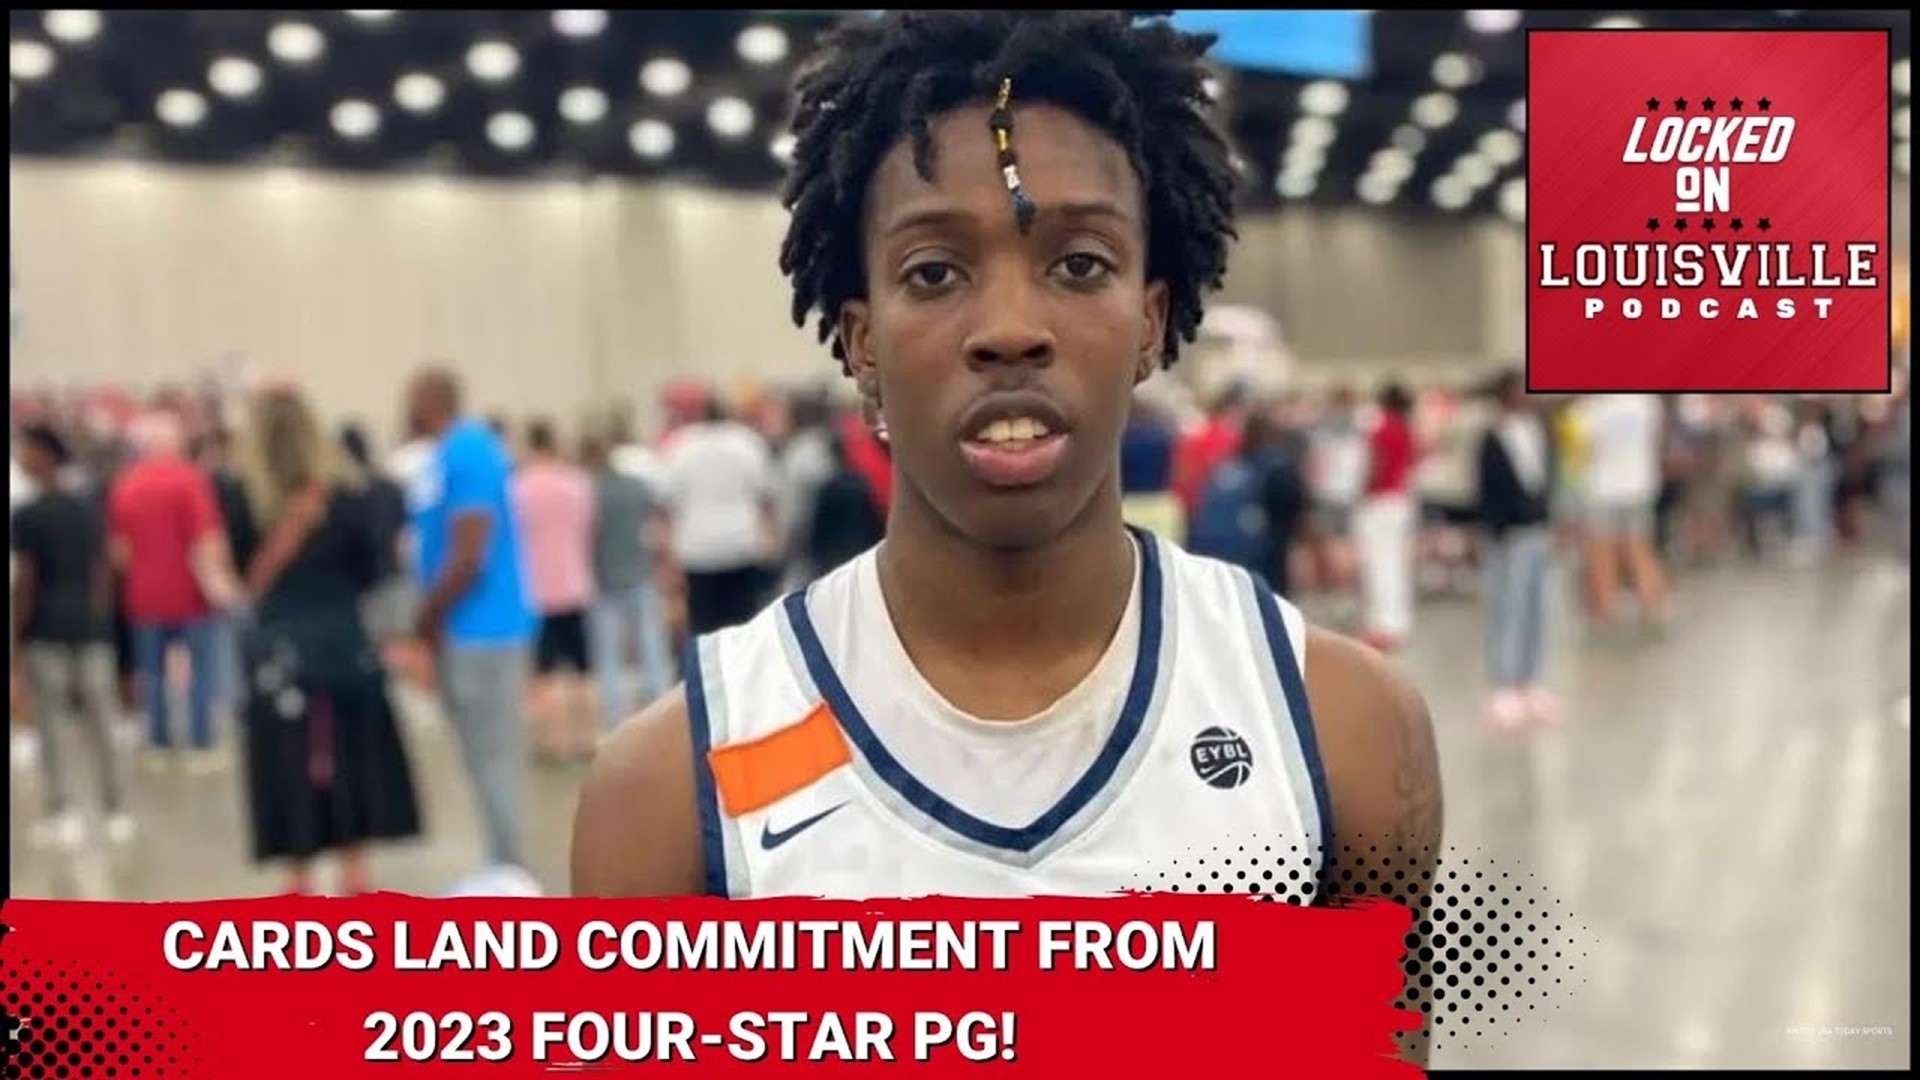 New 2023 basketball commit Ty-Laur Johnson fills a big need for the Louisville Cardinals!